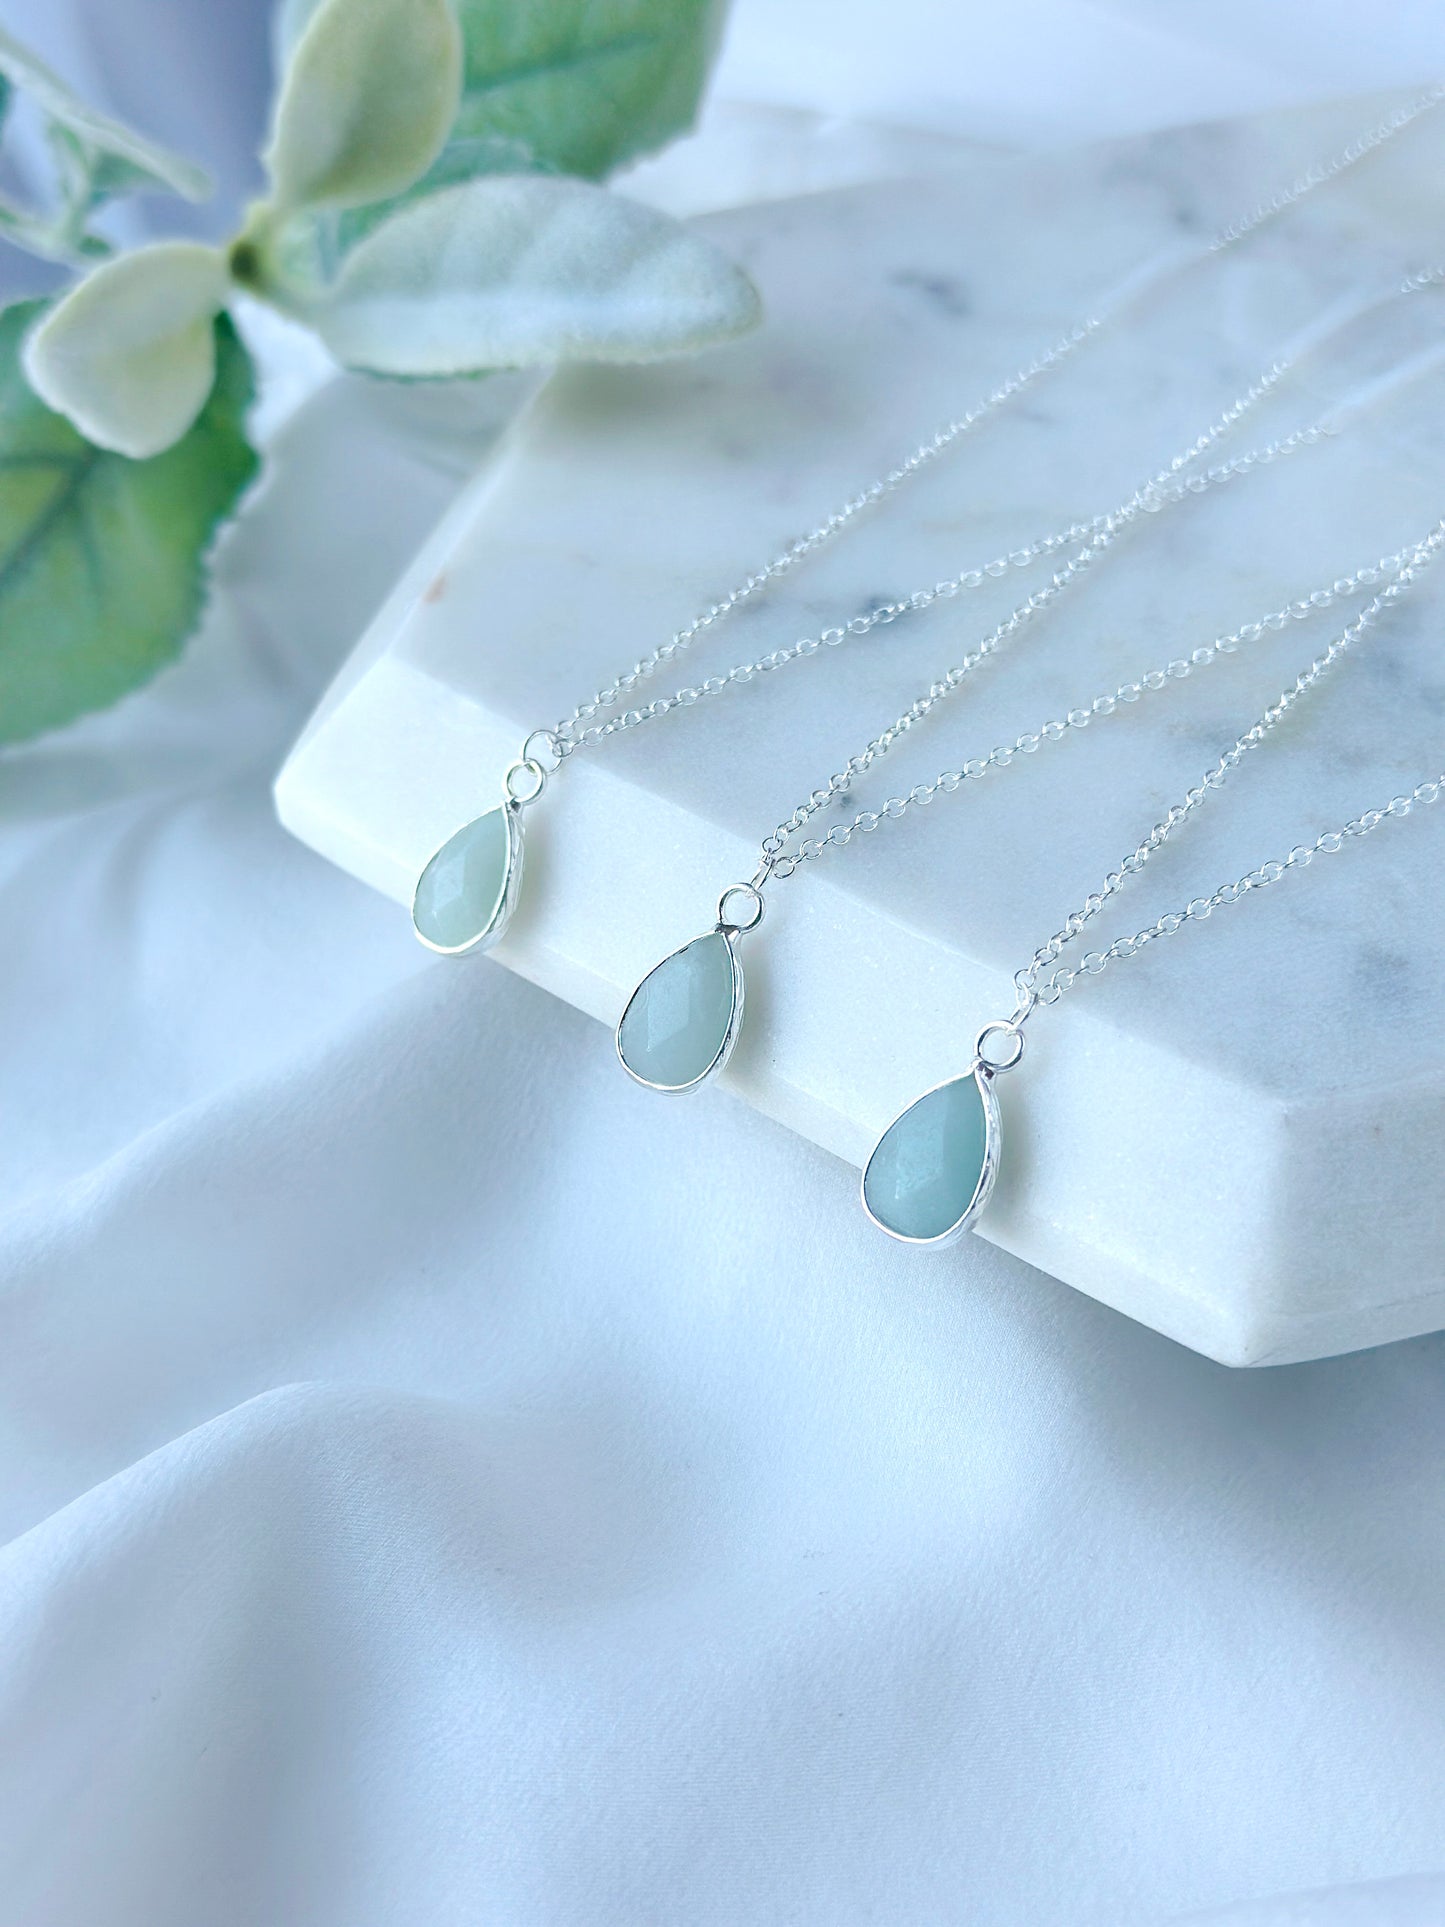 Introducing the Baya Necklace: A sterling silver pendant necklace adorned with a captivating Aquamarine gemstone.